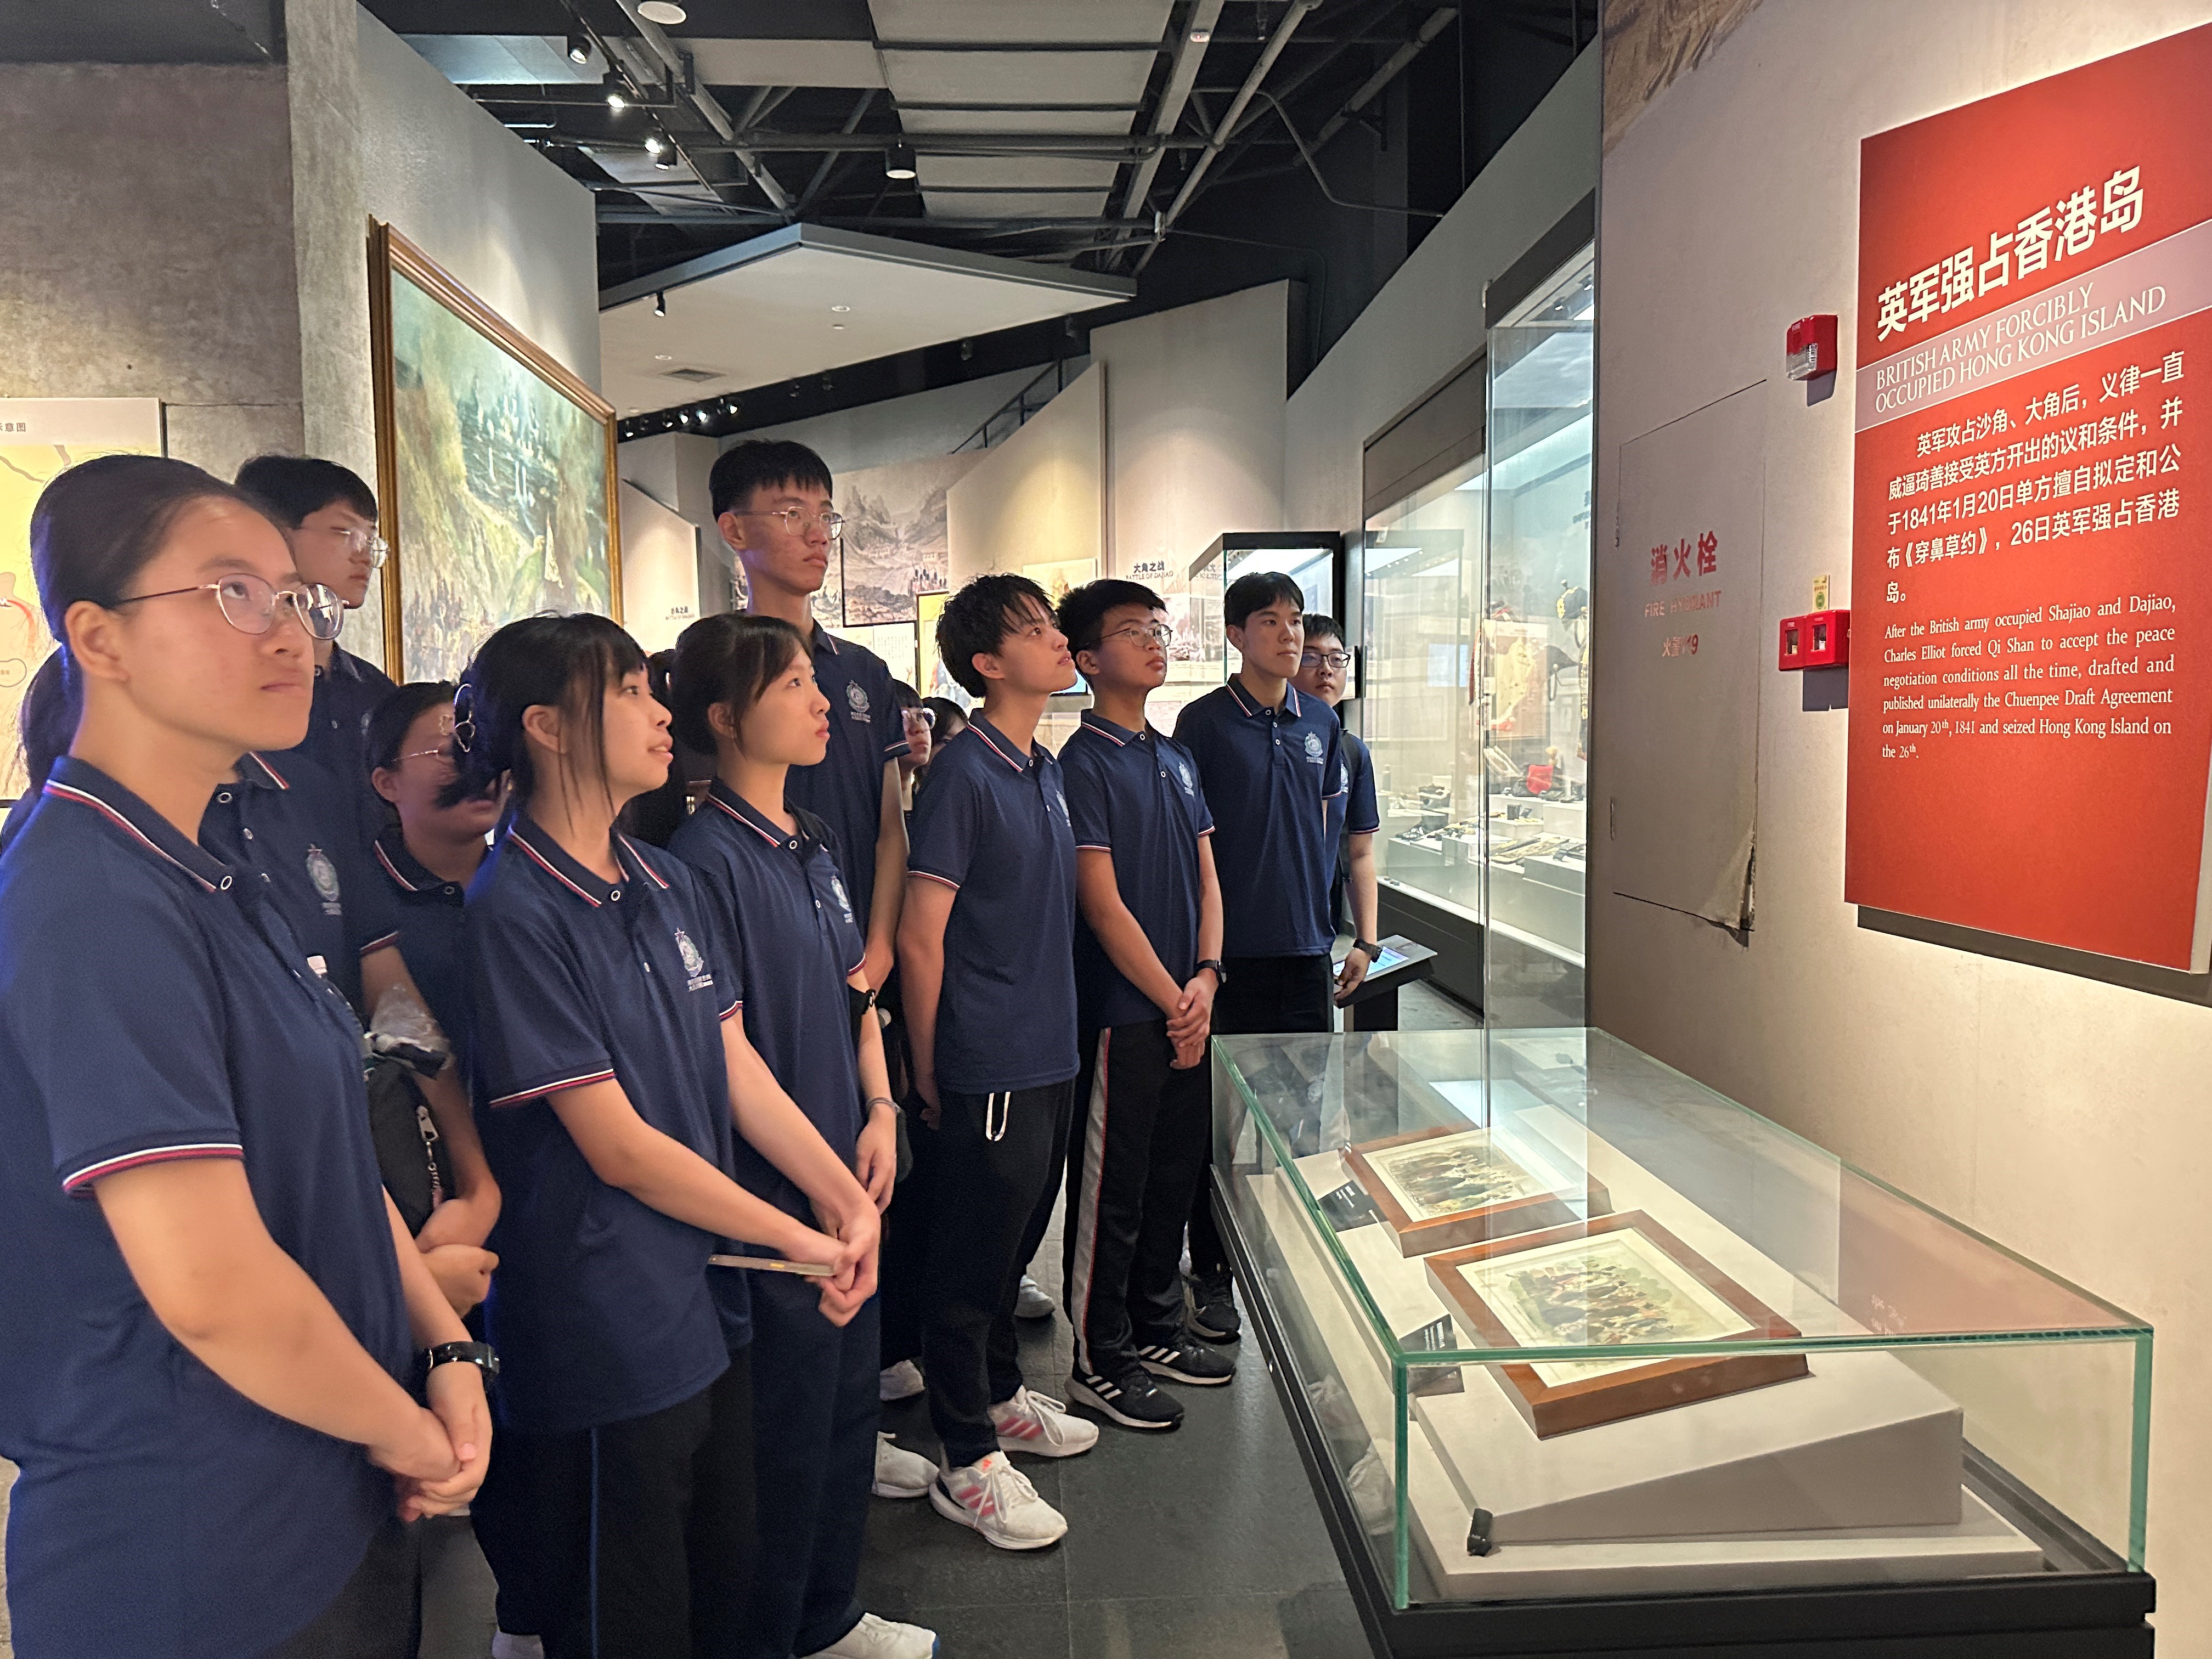 Members of the Immigration Department Youth Leaders Corps visited the Sea Battle Museum in Dongguan on July 25 to learn about the history of the Opium War.